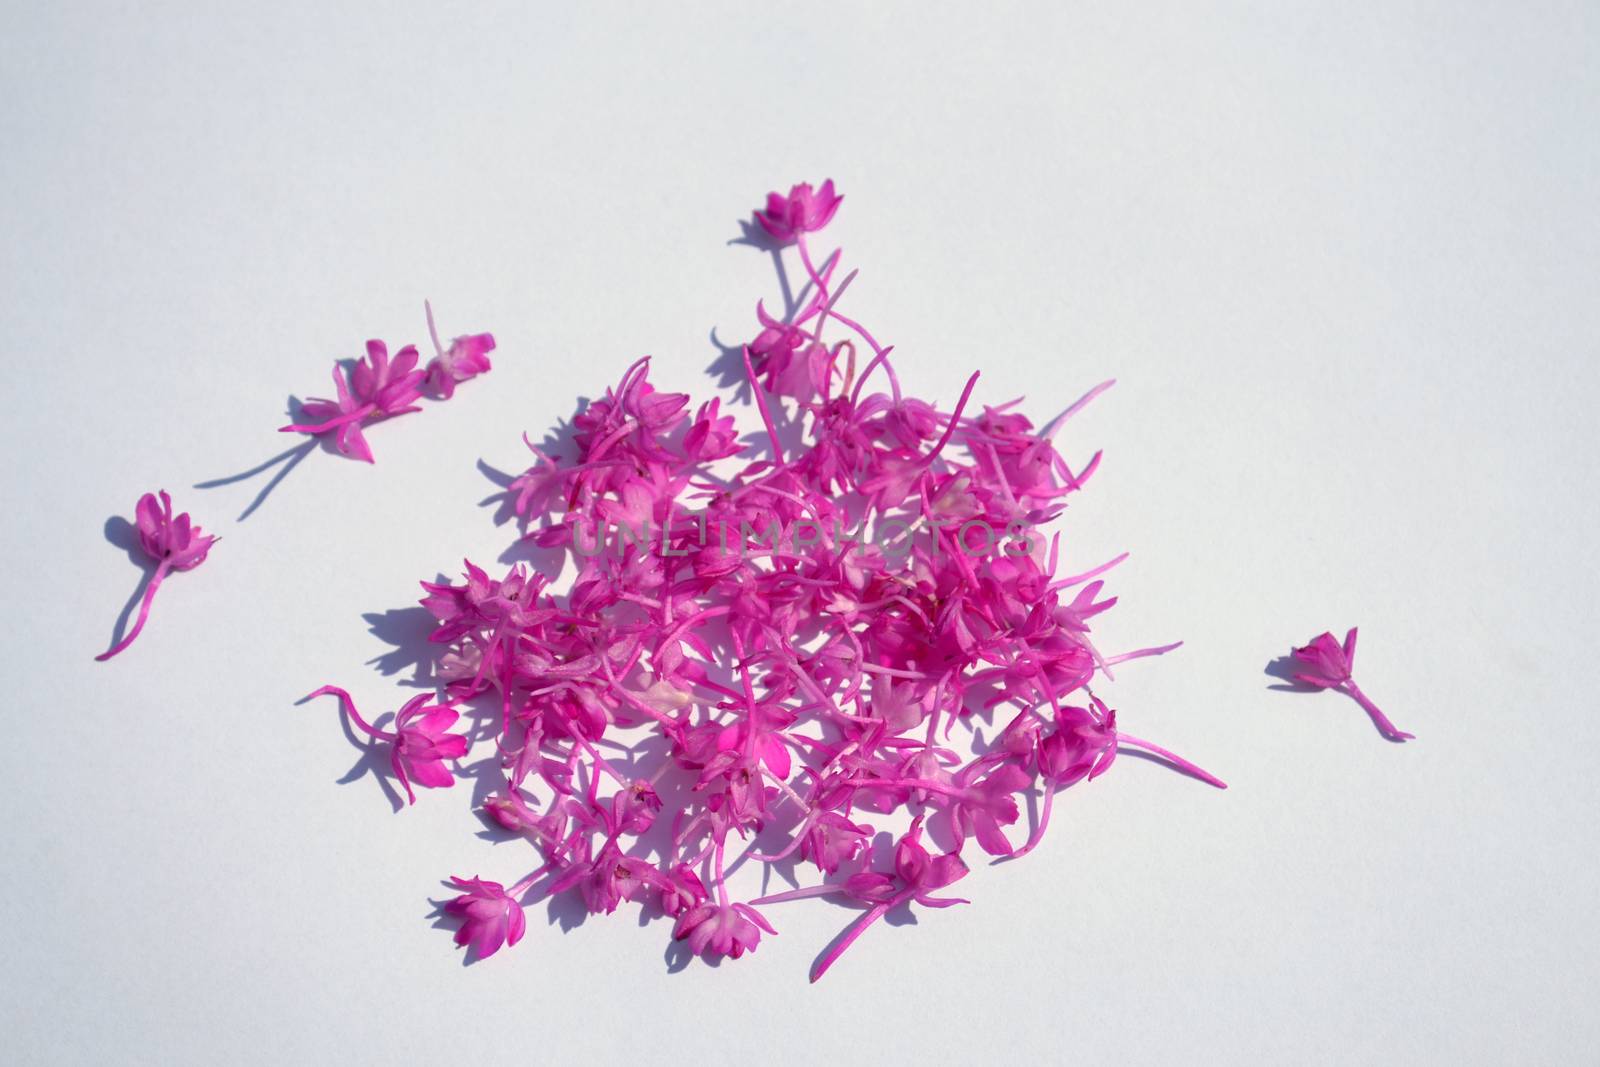 Bunch of pink flowers on white background by hibrida13